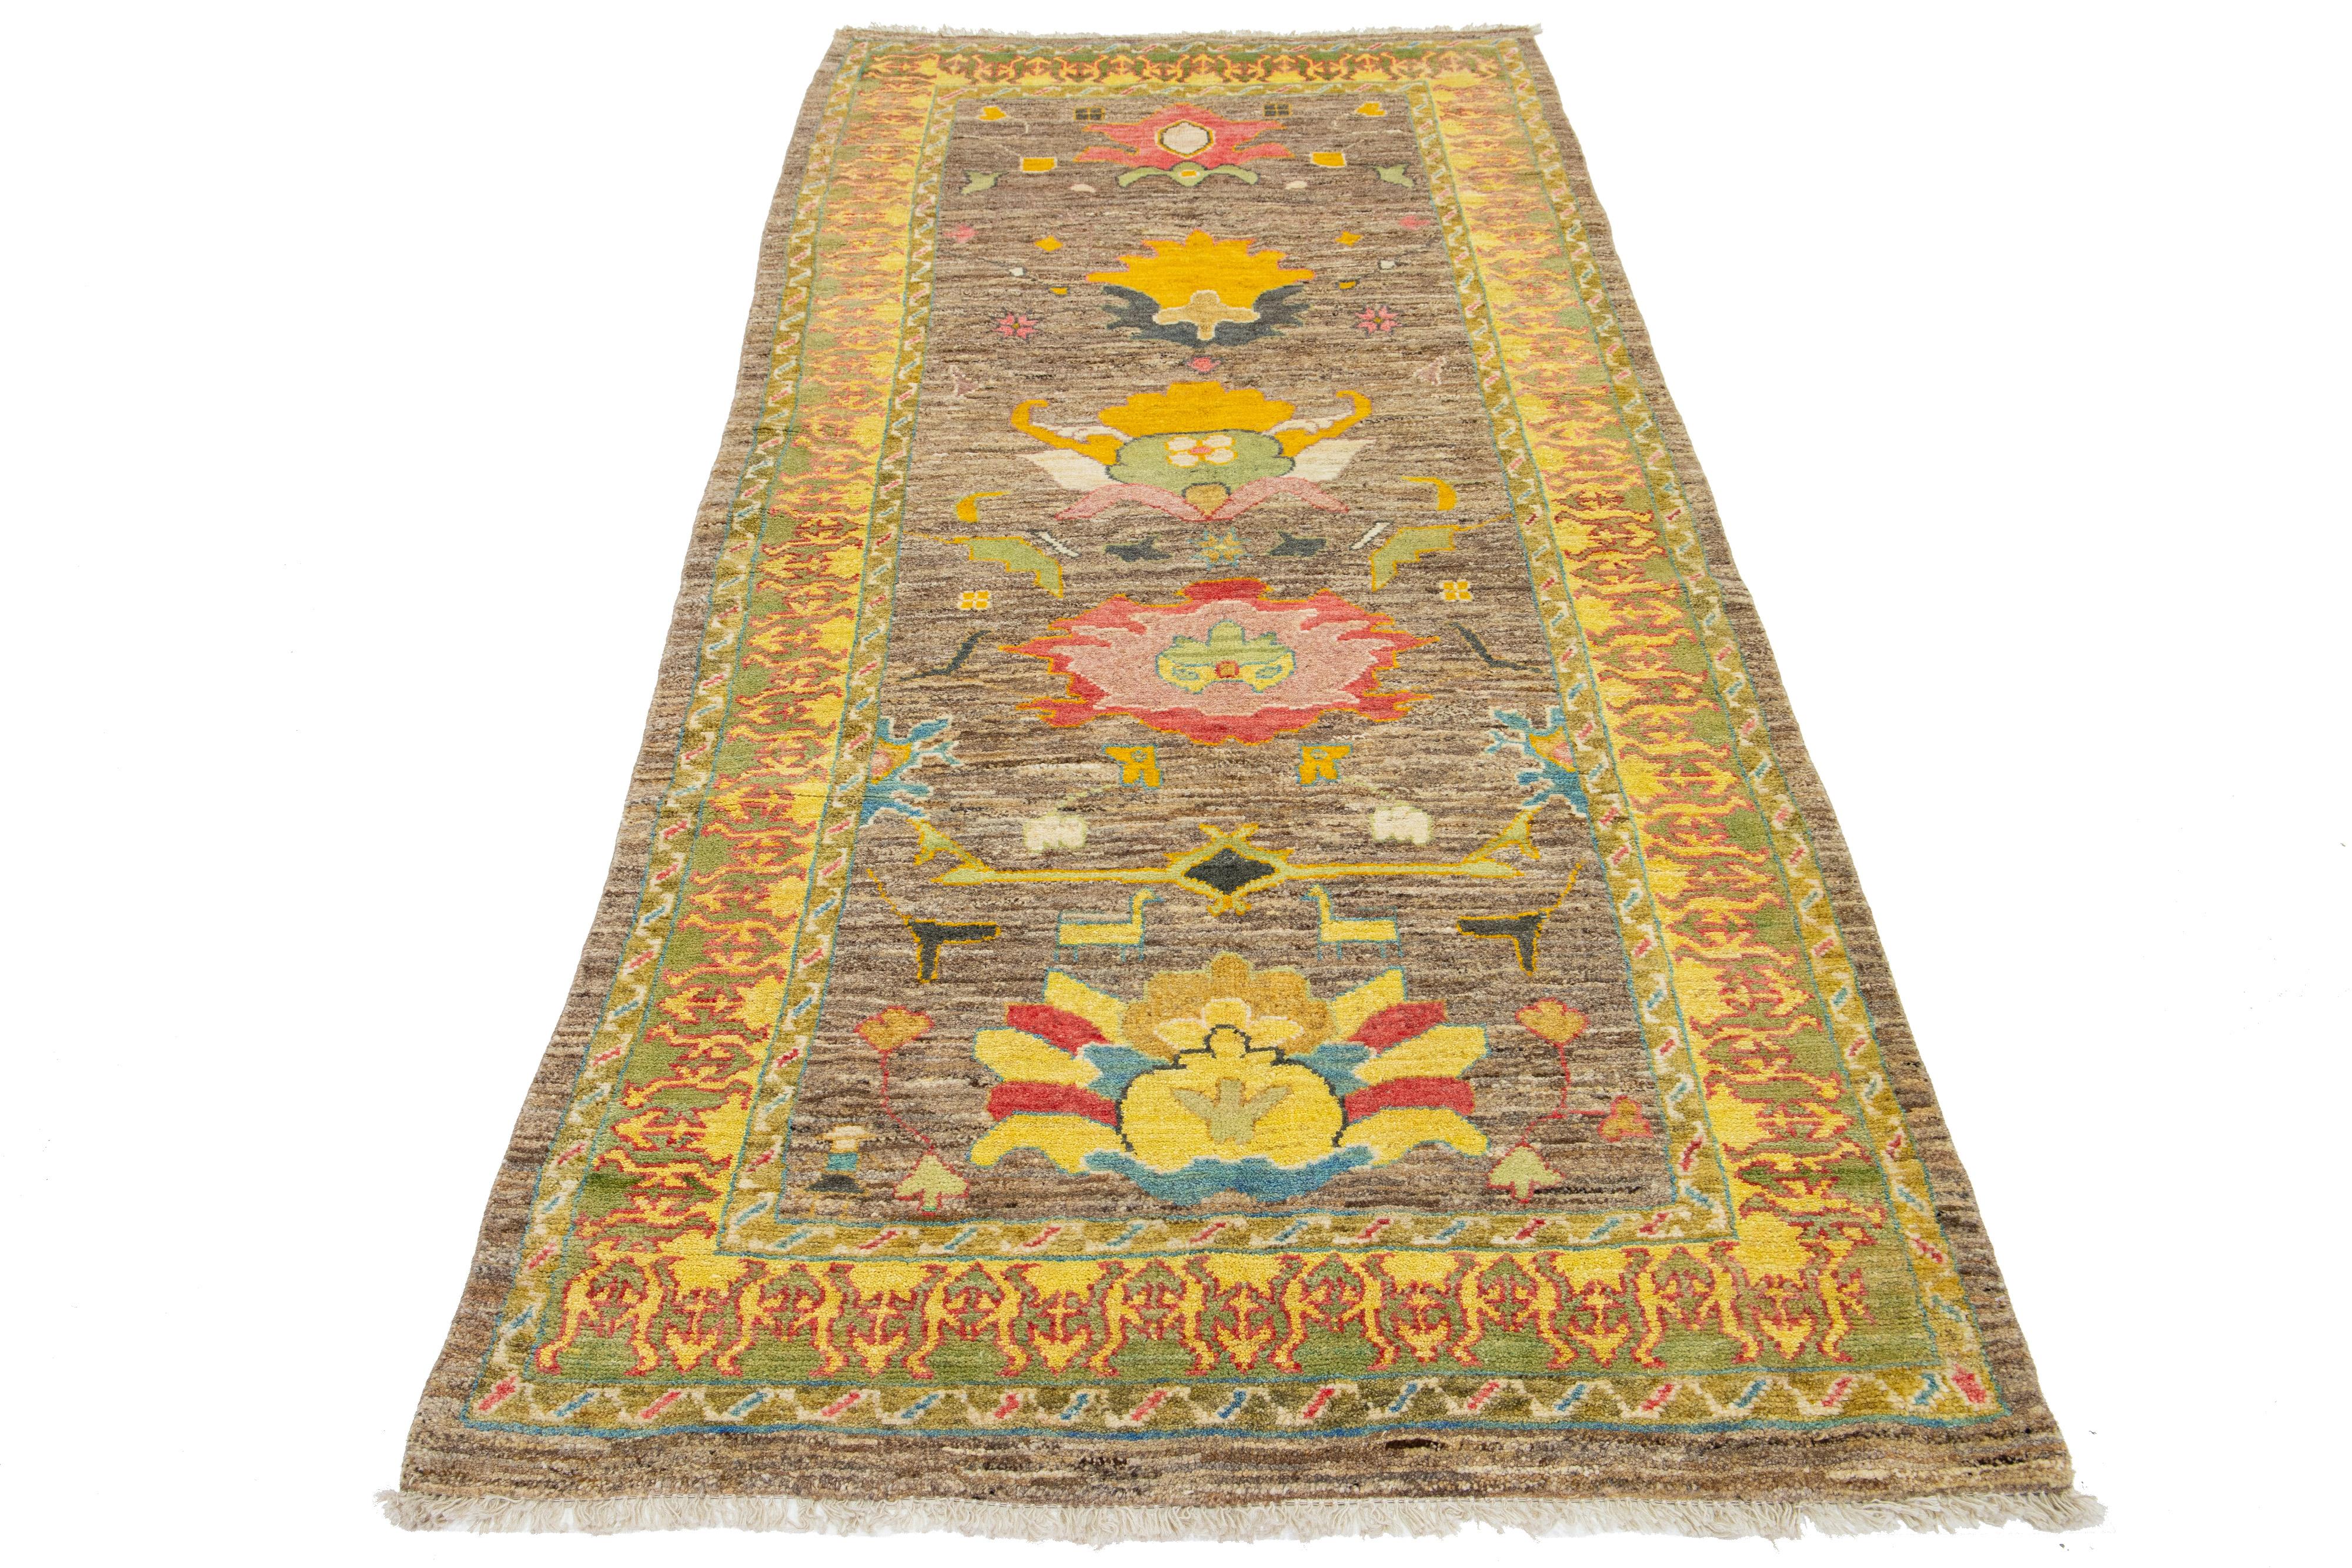 This hand-knotted wool rug features a lovely brown base and a stunning floral pattern with vibrant yellow, gray, red, and green accents. It's an exquisite addition to any decor.

This rug measures 4'3